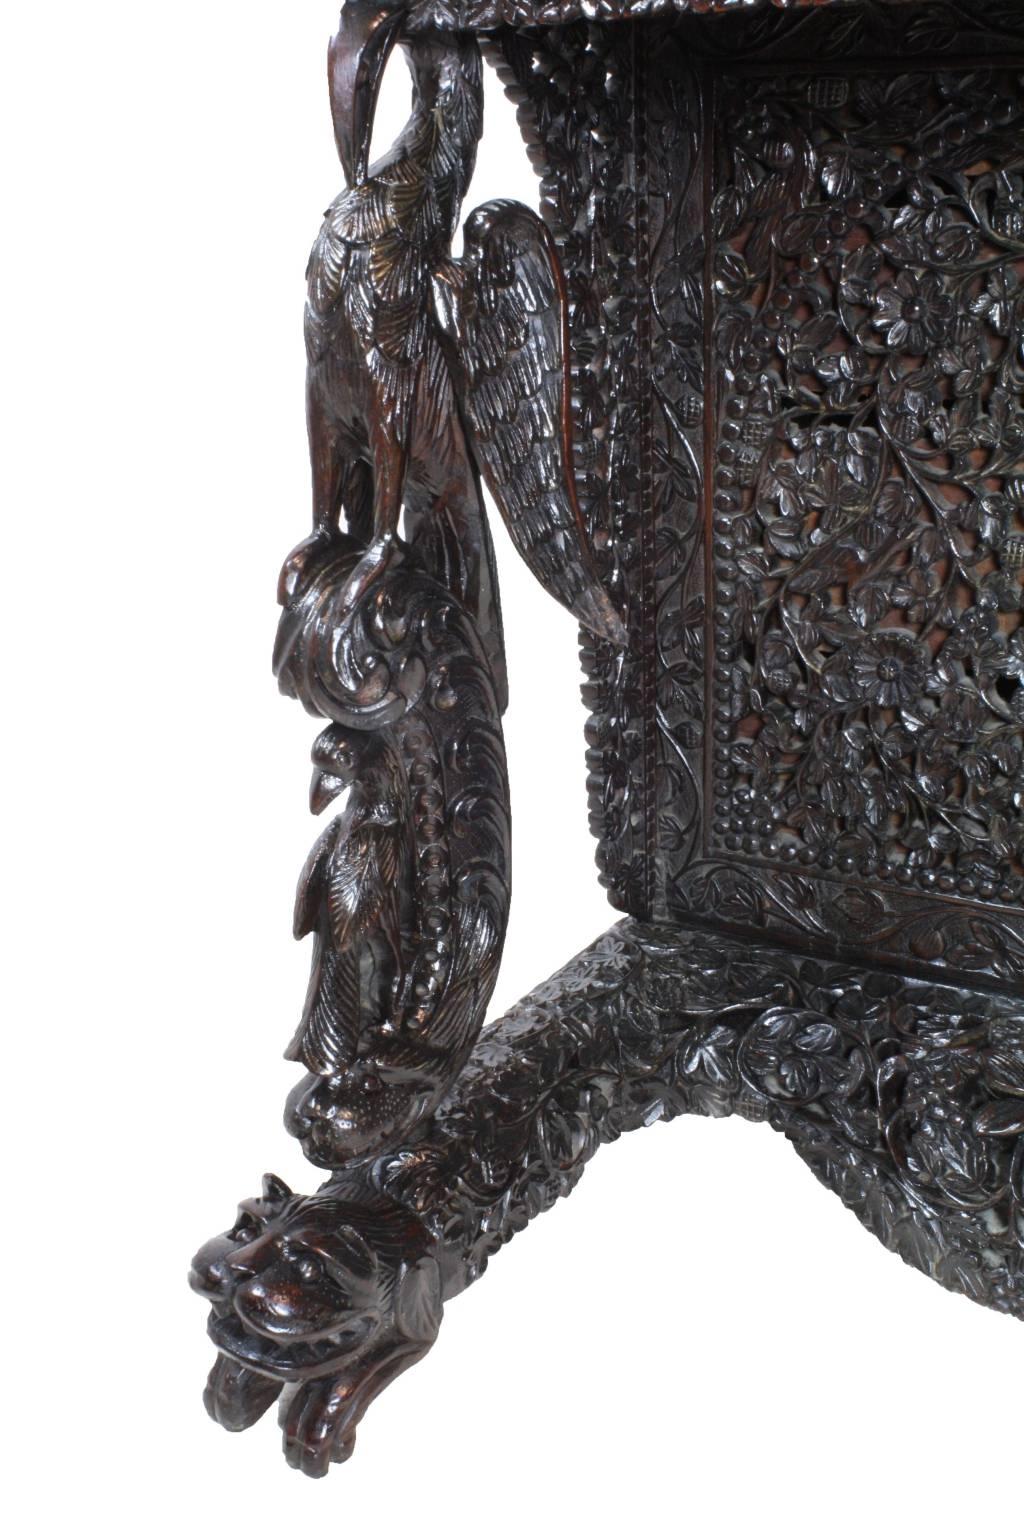 All-over carving on this exceptional piece. When we see these pieces the first place we look is the feet. The feet, especially the lions head detail, range in execution from fair to excellent, or have been extensively worn or damaged. This Davenport